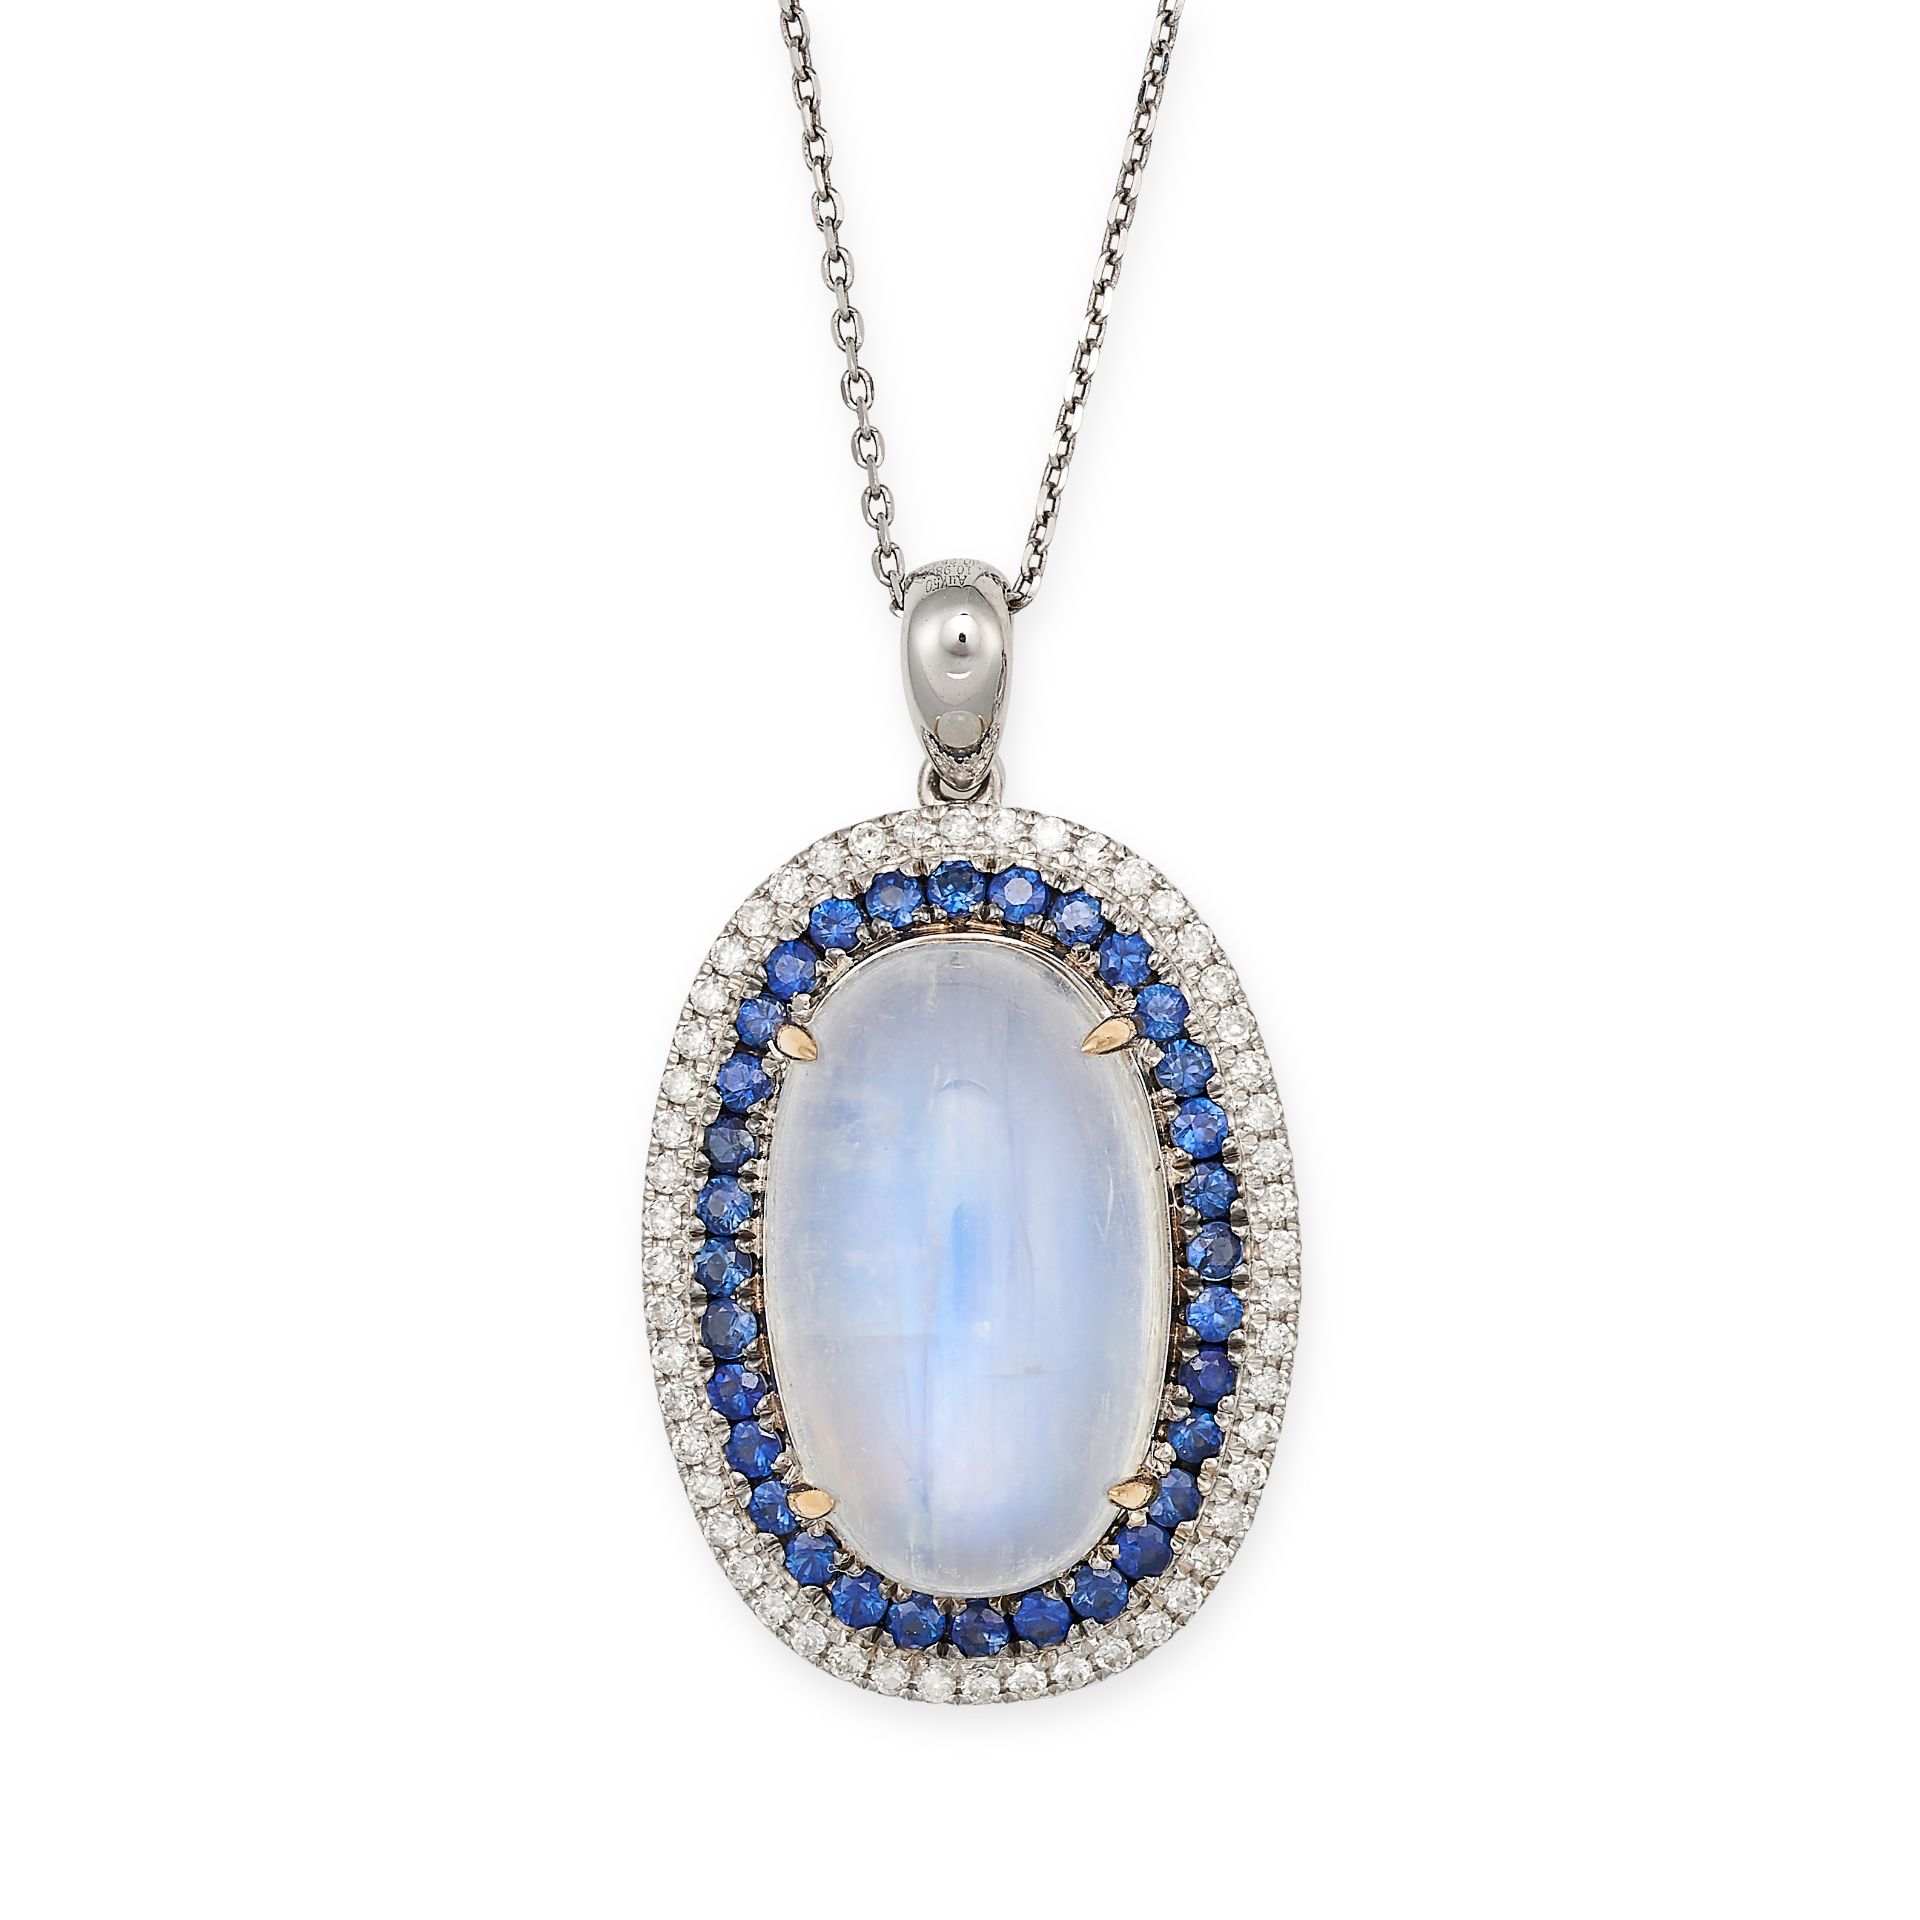 A RAINBOW MOONSTONE, SAPPHIRE AND DIAMOND PENDANT NECKLACE in 18ct white gold, the pendant